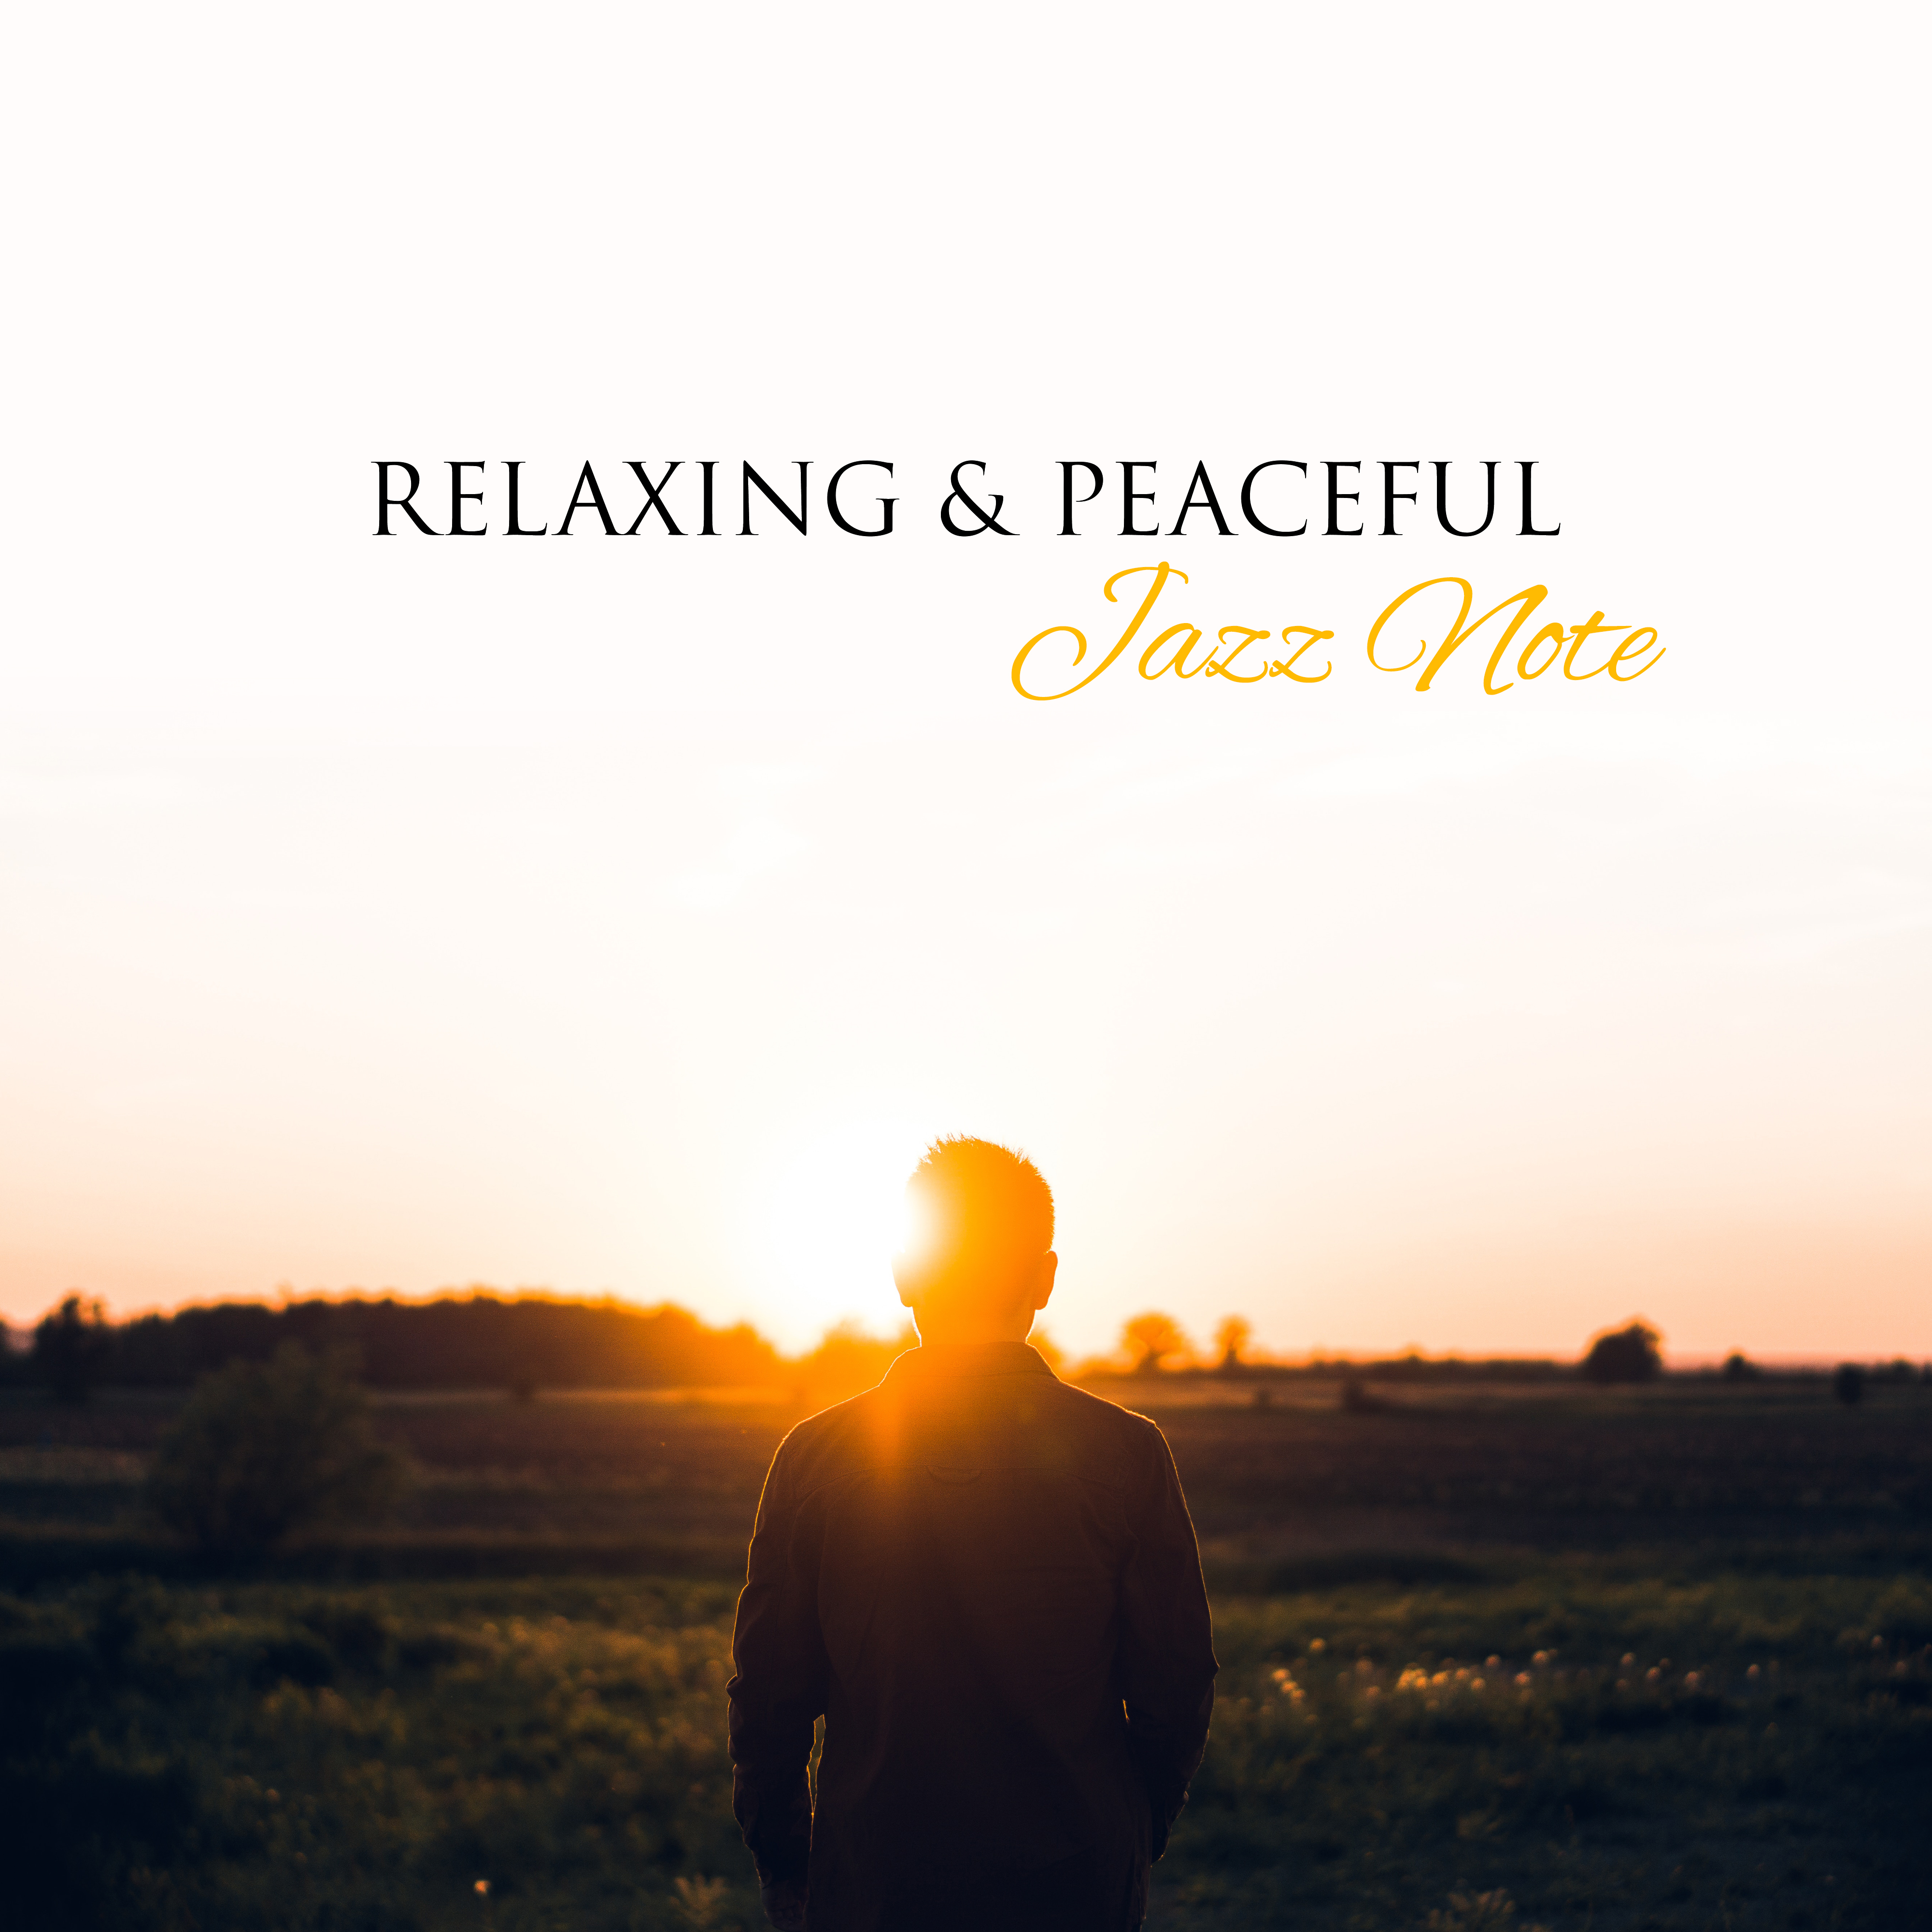 Relaxing & Peaceful Jazz Note – Soft Sounds to Relax, Night Jazz Club, Rest a Bit, Calm Melodies